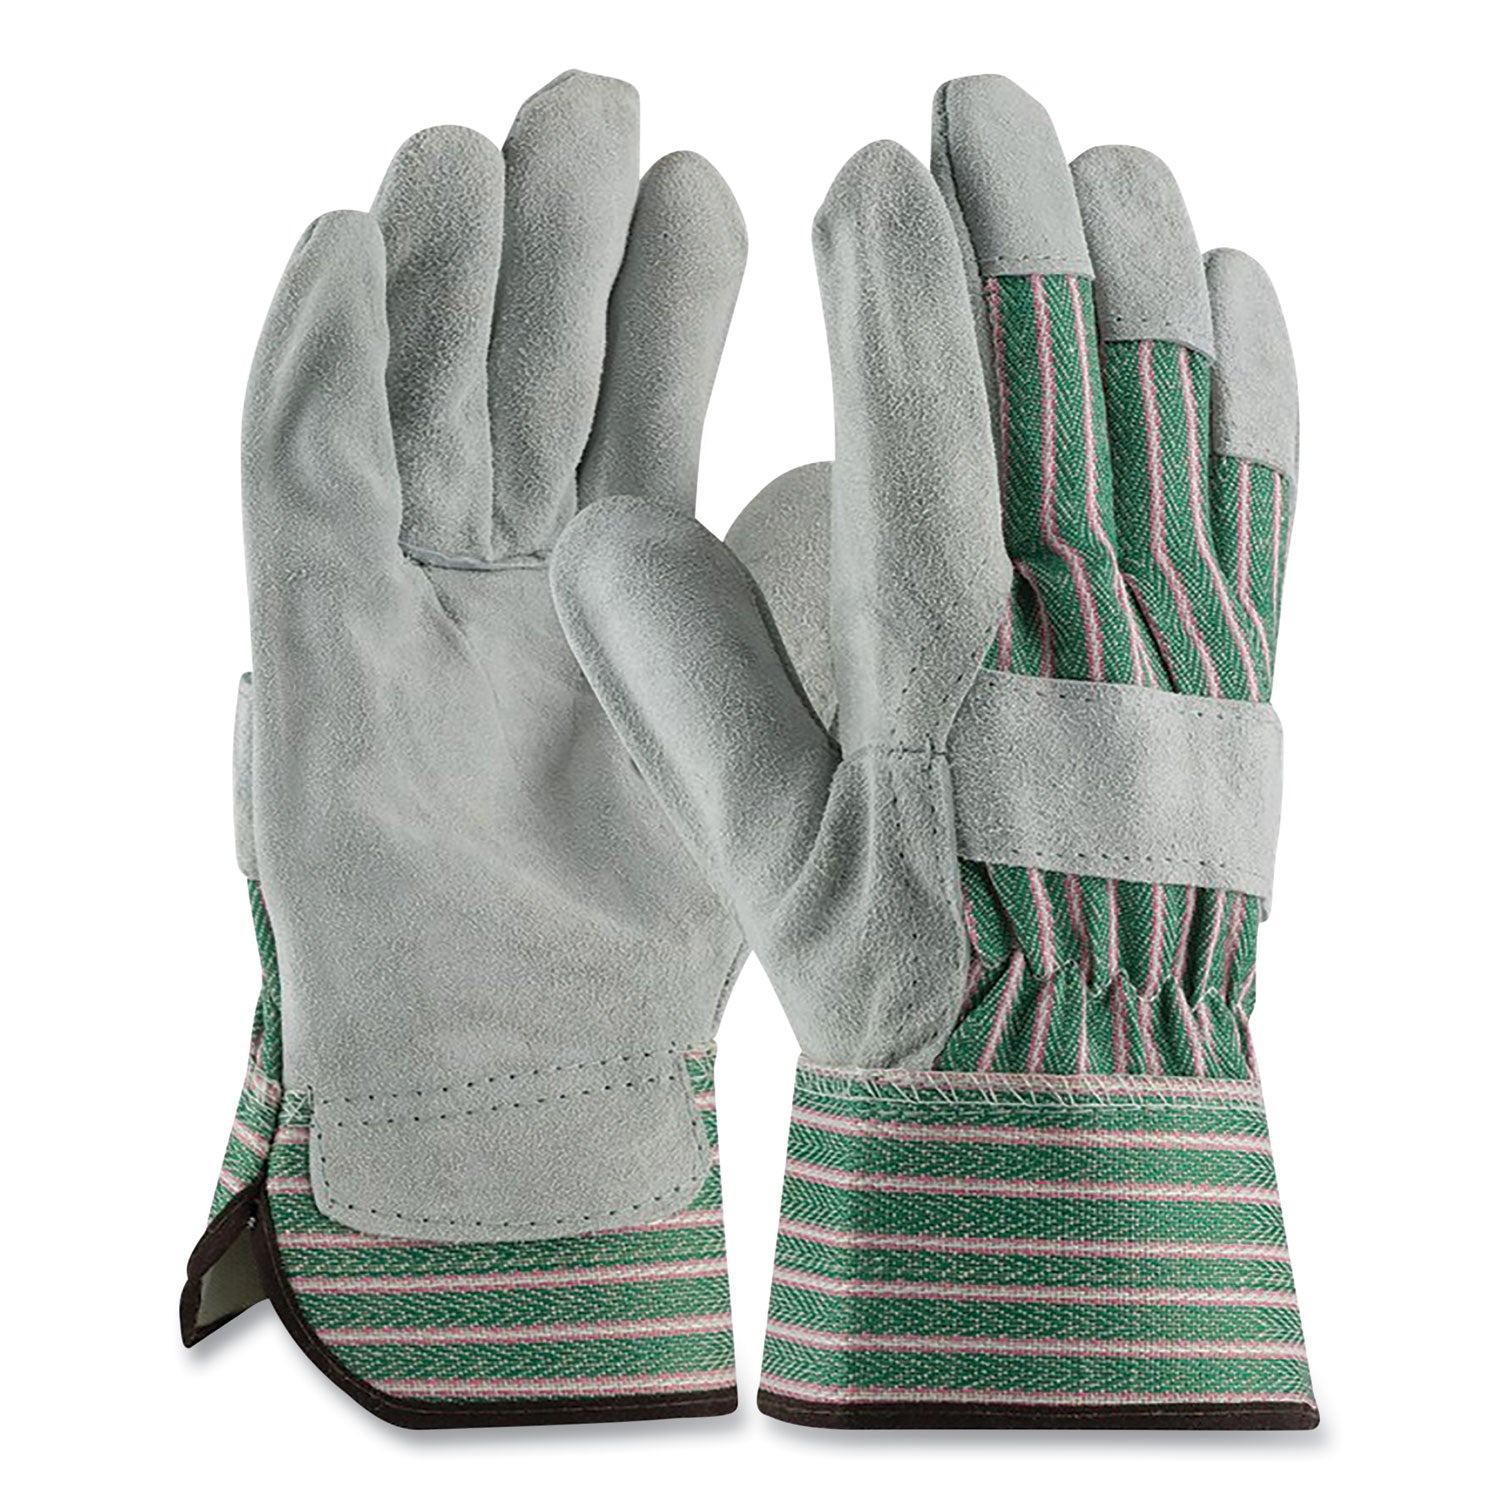 bronze-series-leather-fabric-work-gloves-large-size-9-gray-green-12-pairs_pid836563l - 2